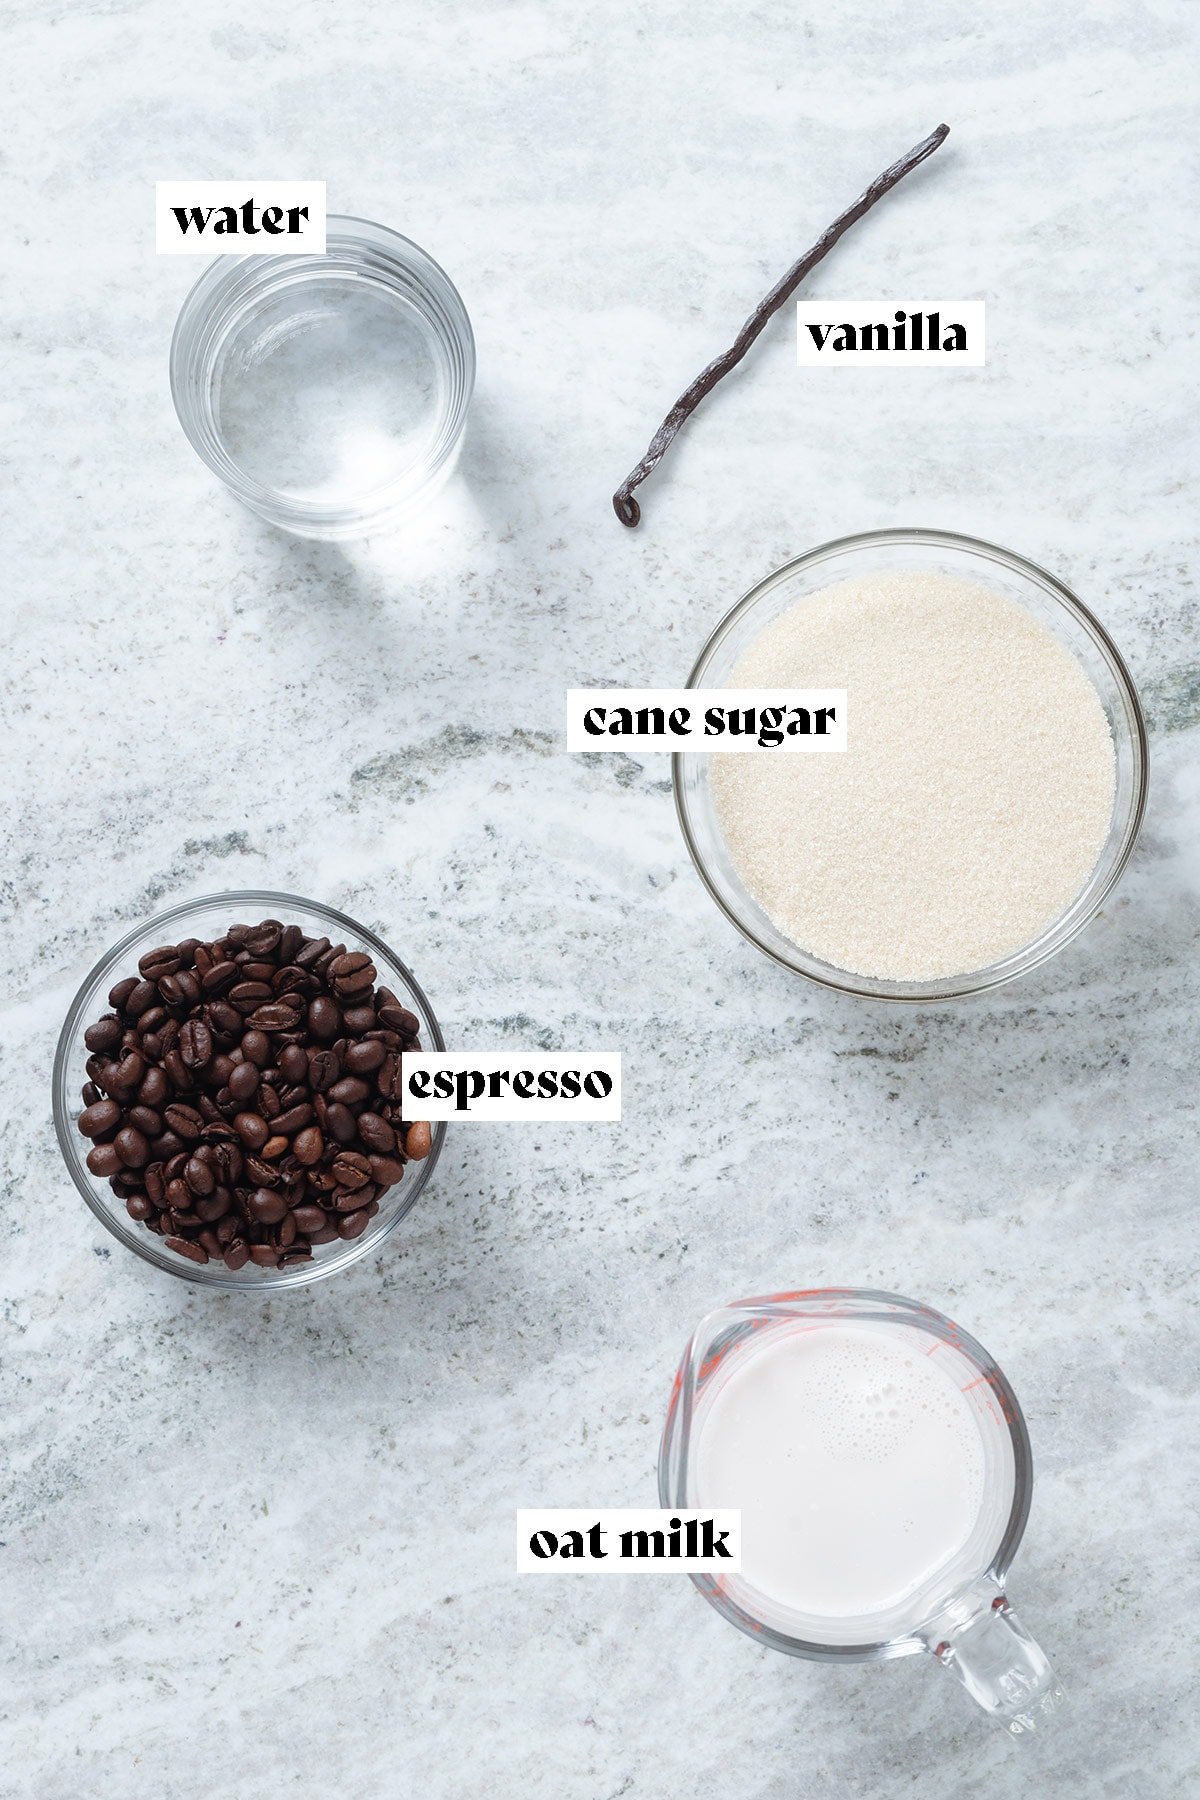 Ingredients like cane sugar, coffee beans, a vanilla bean, and milk laid out on a grey stone background with text overlay.